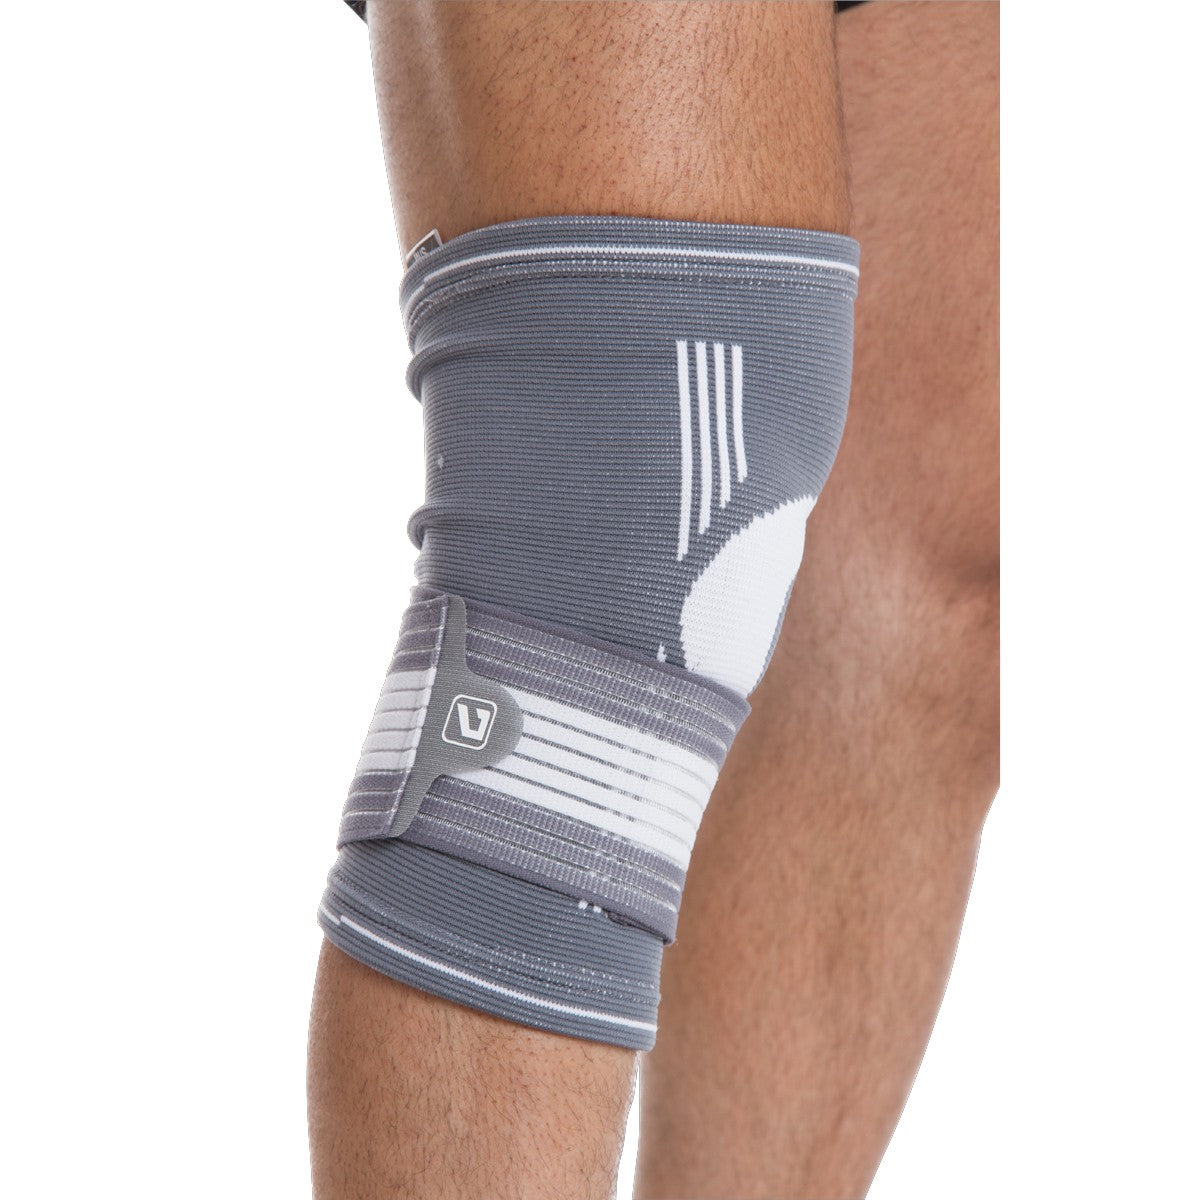 Live Up Heavy Duty Knee Support - S/M